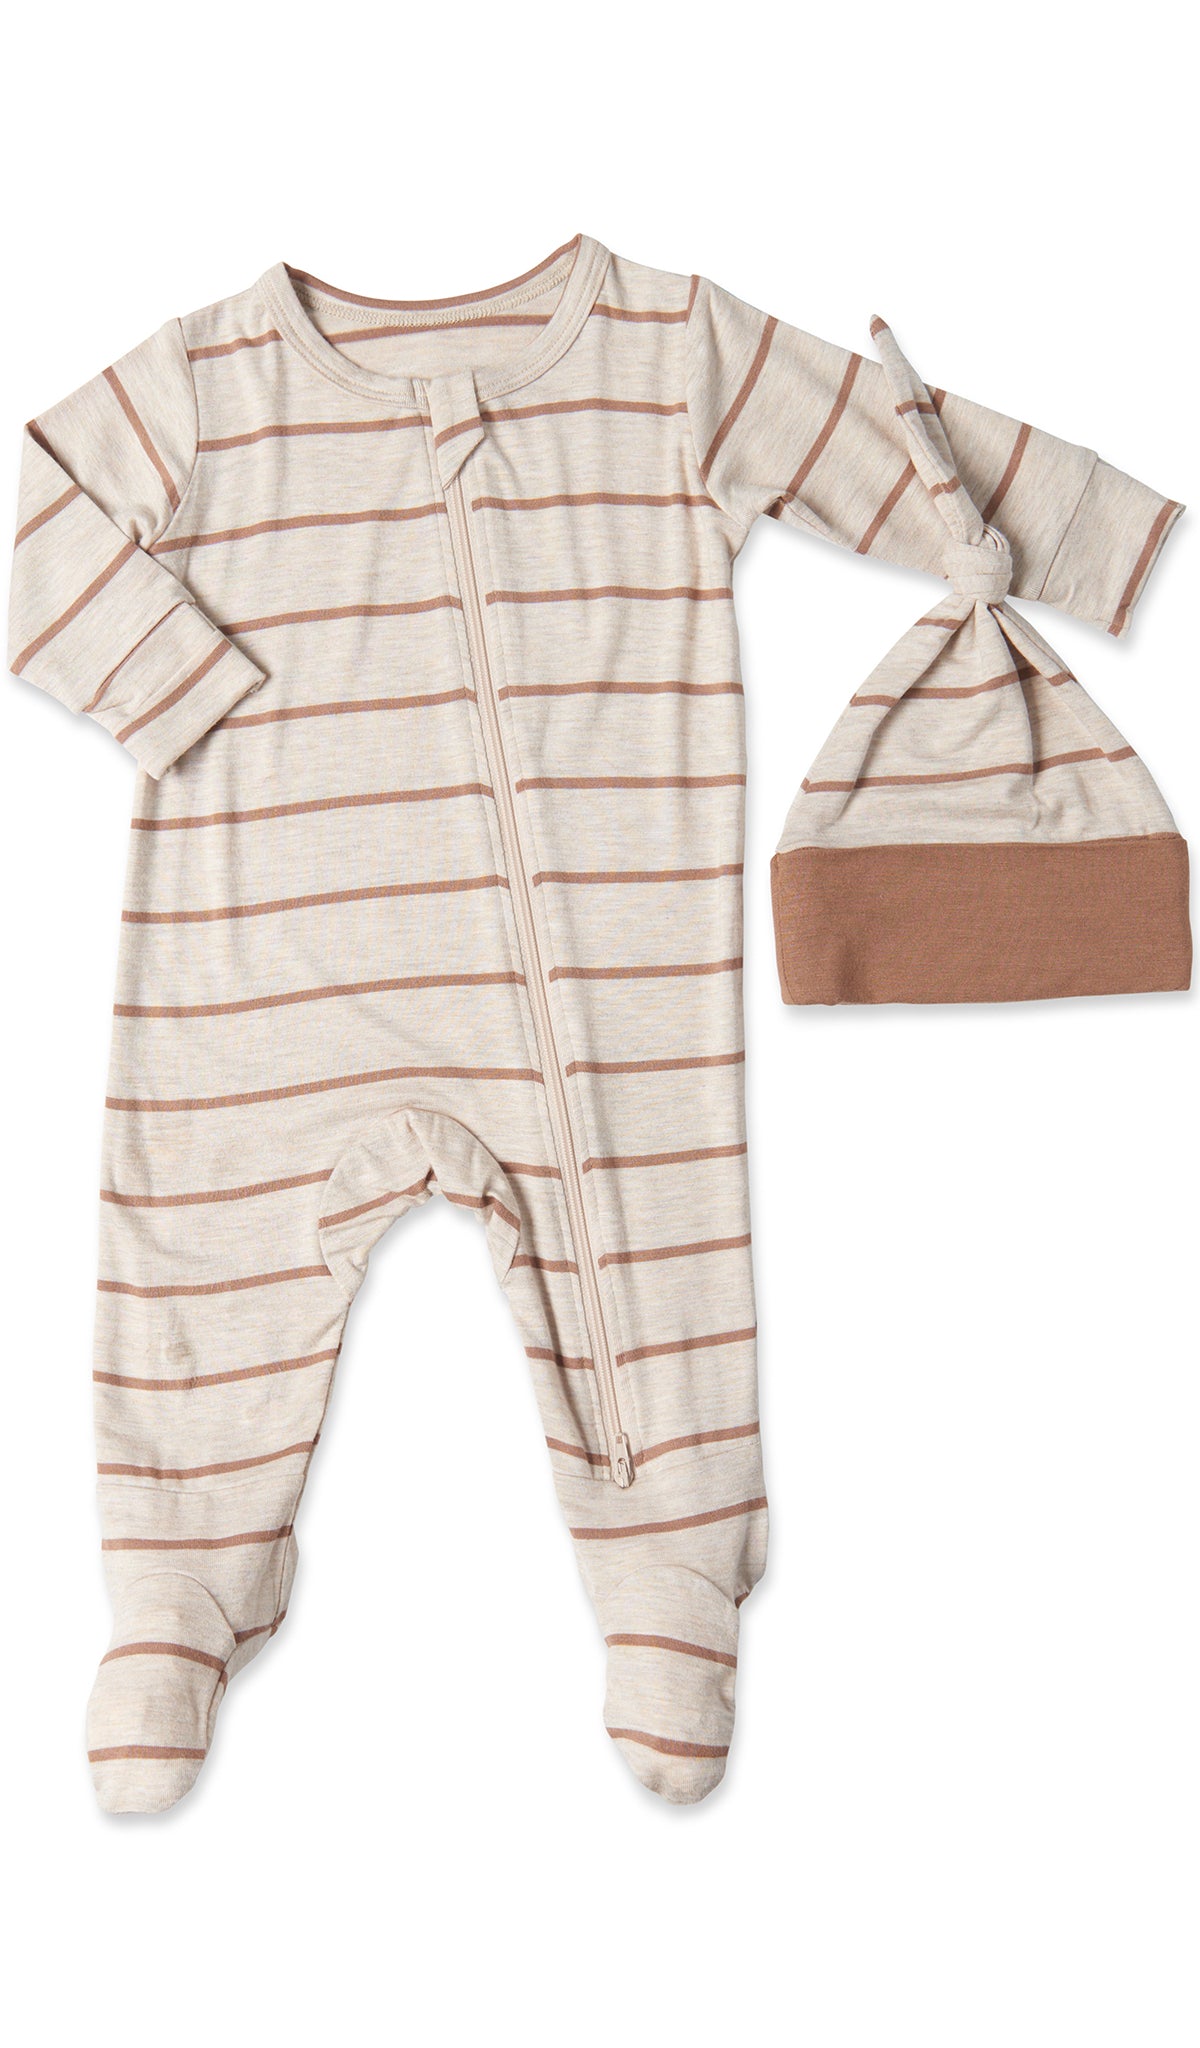 Mocha Stripe Footie 2-Piece with long sleeves, zip front and matching knotted baby hat.